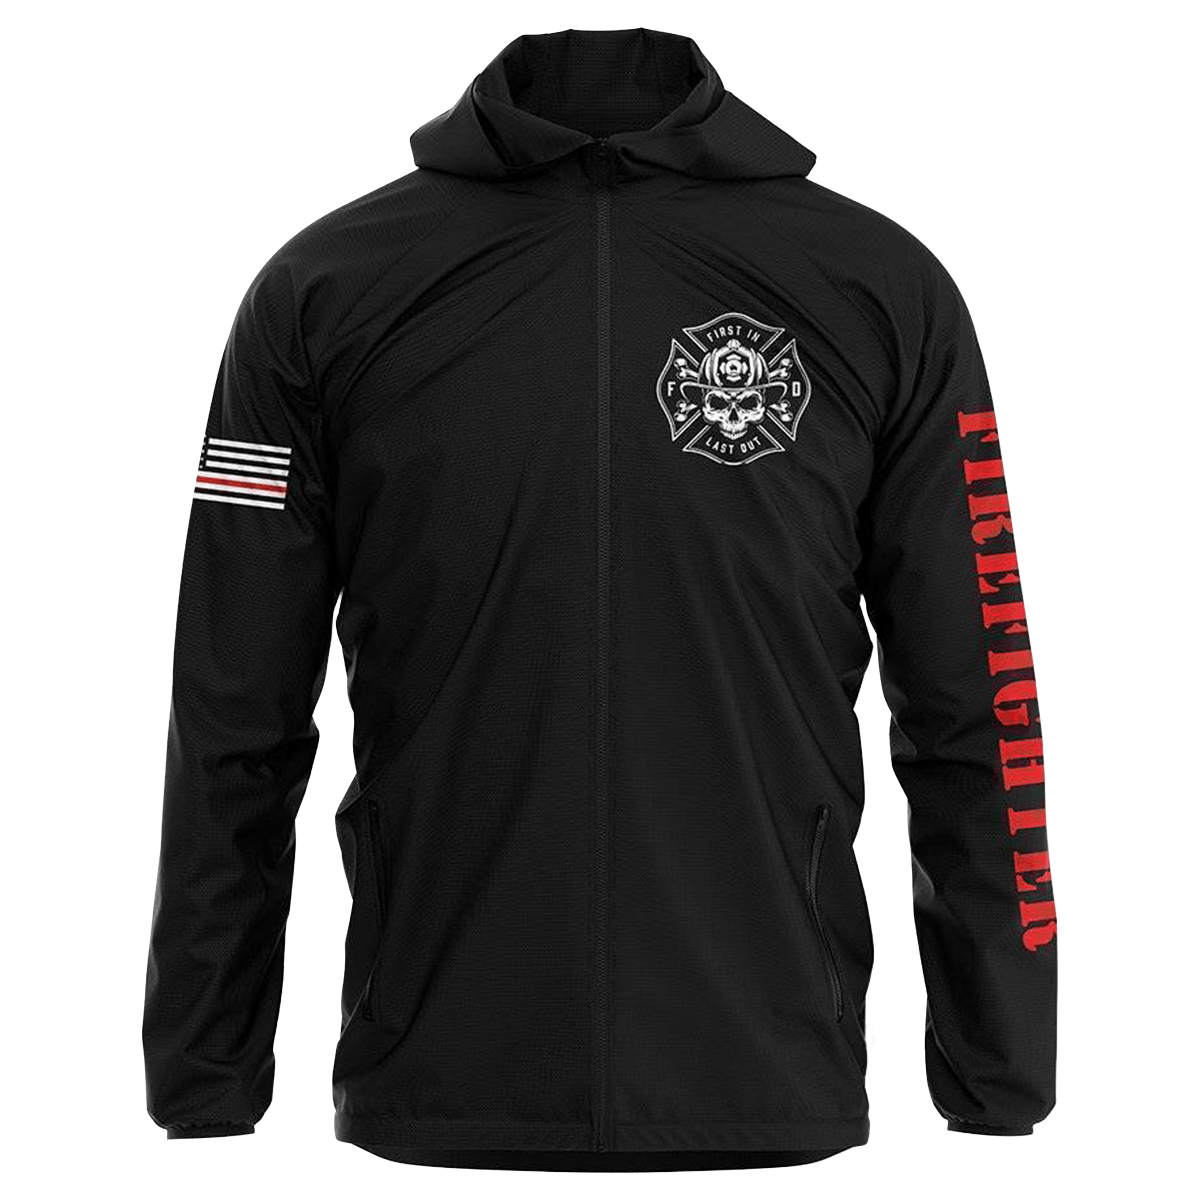 Thin Red Line Jacket - Greater Half